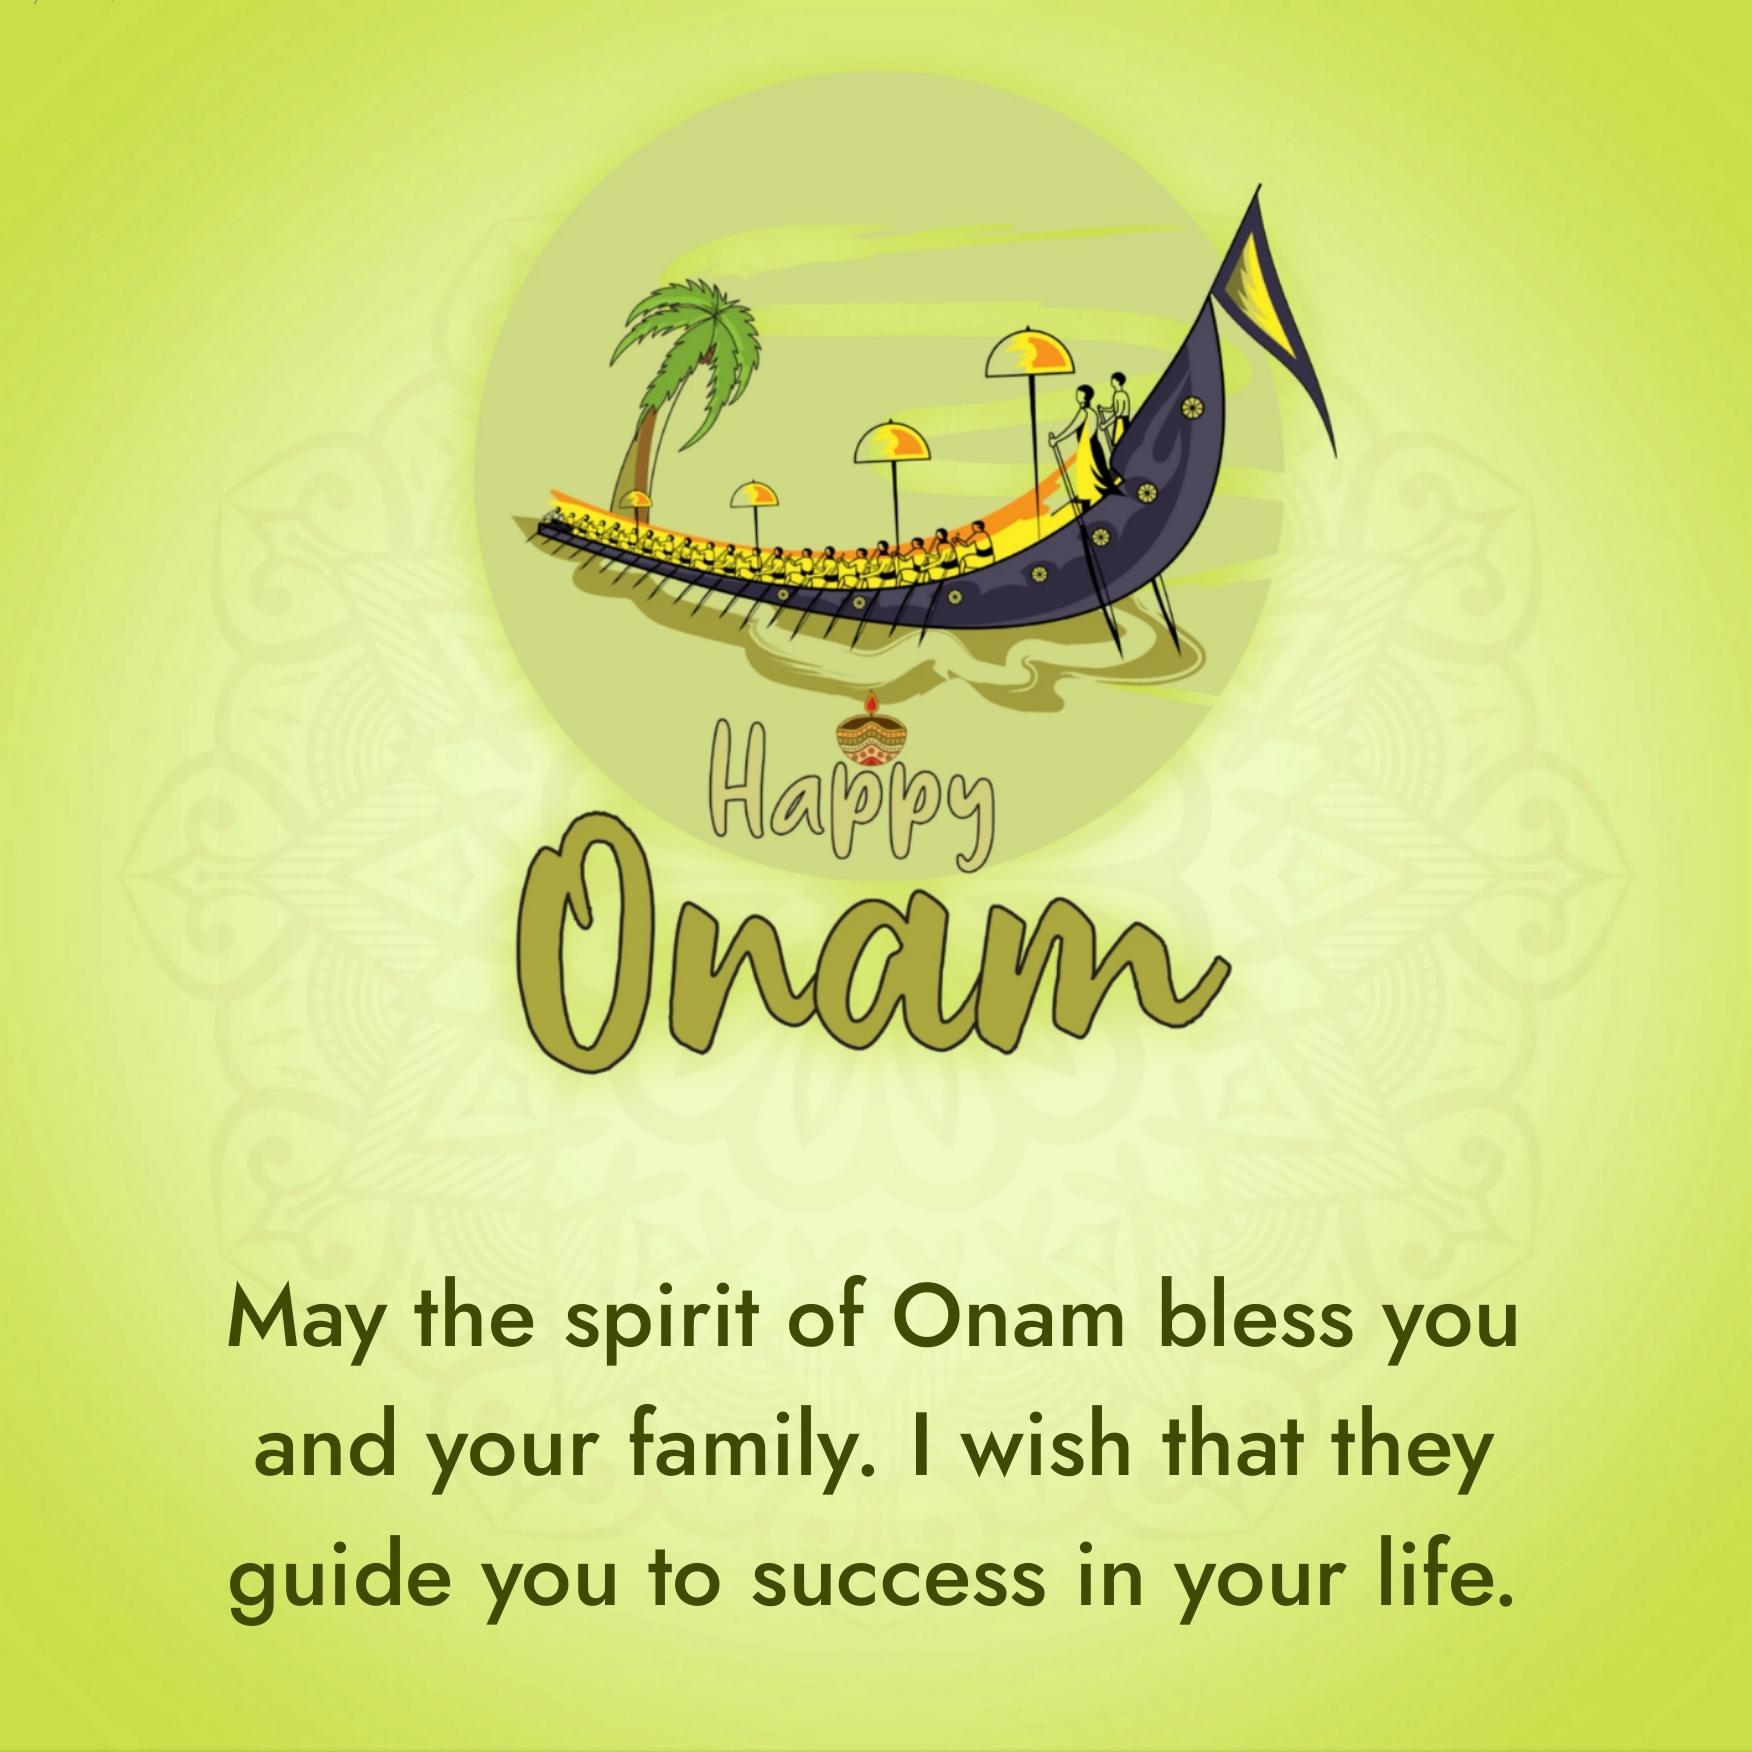 May the spirit of Onam bless you and your family